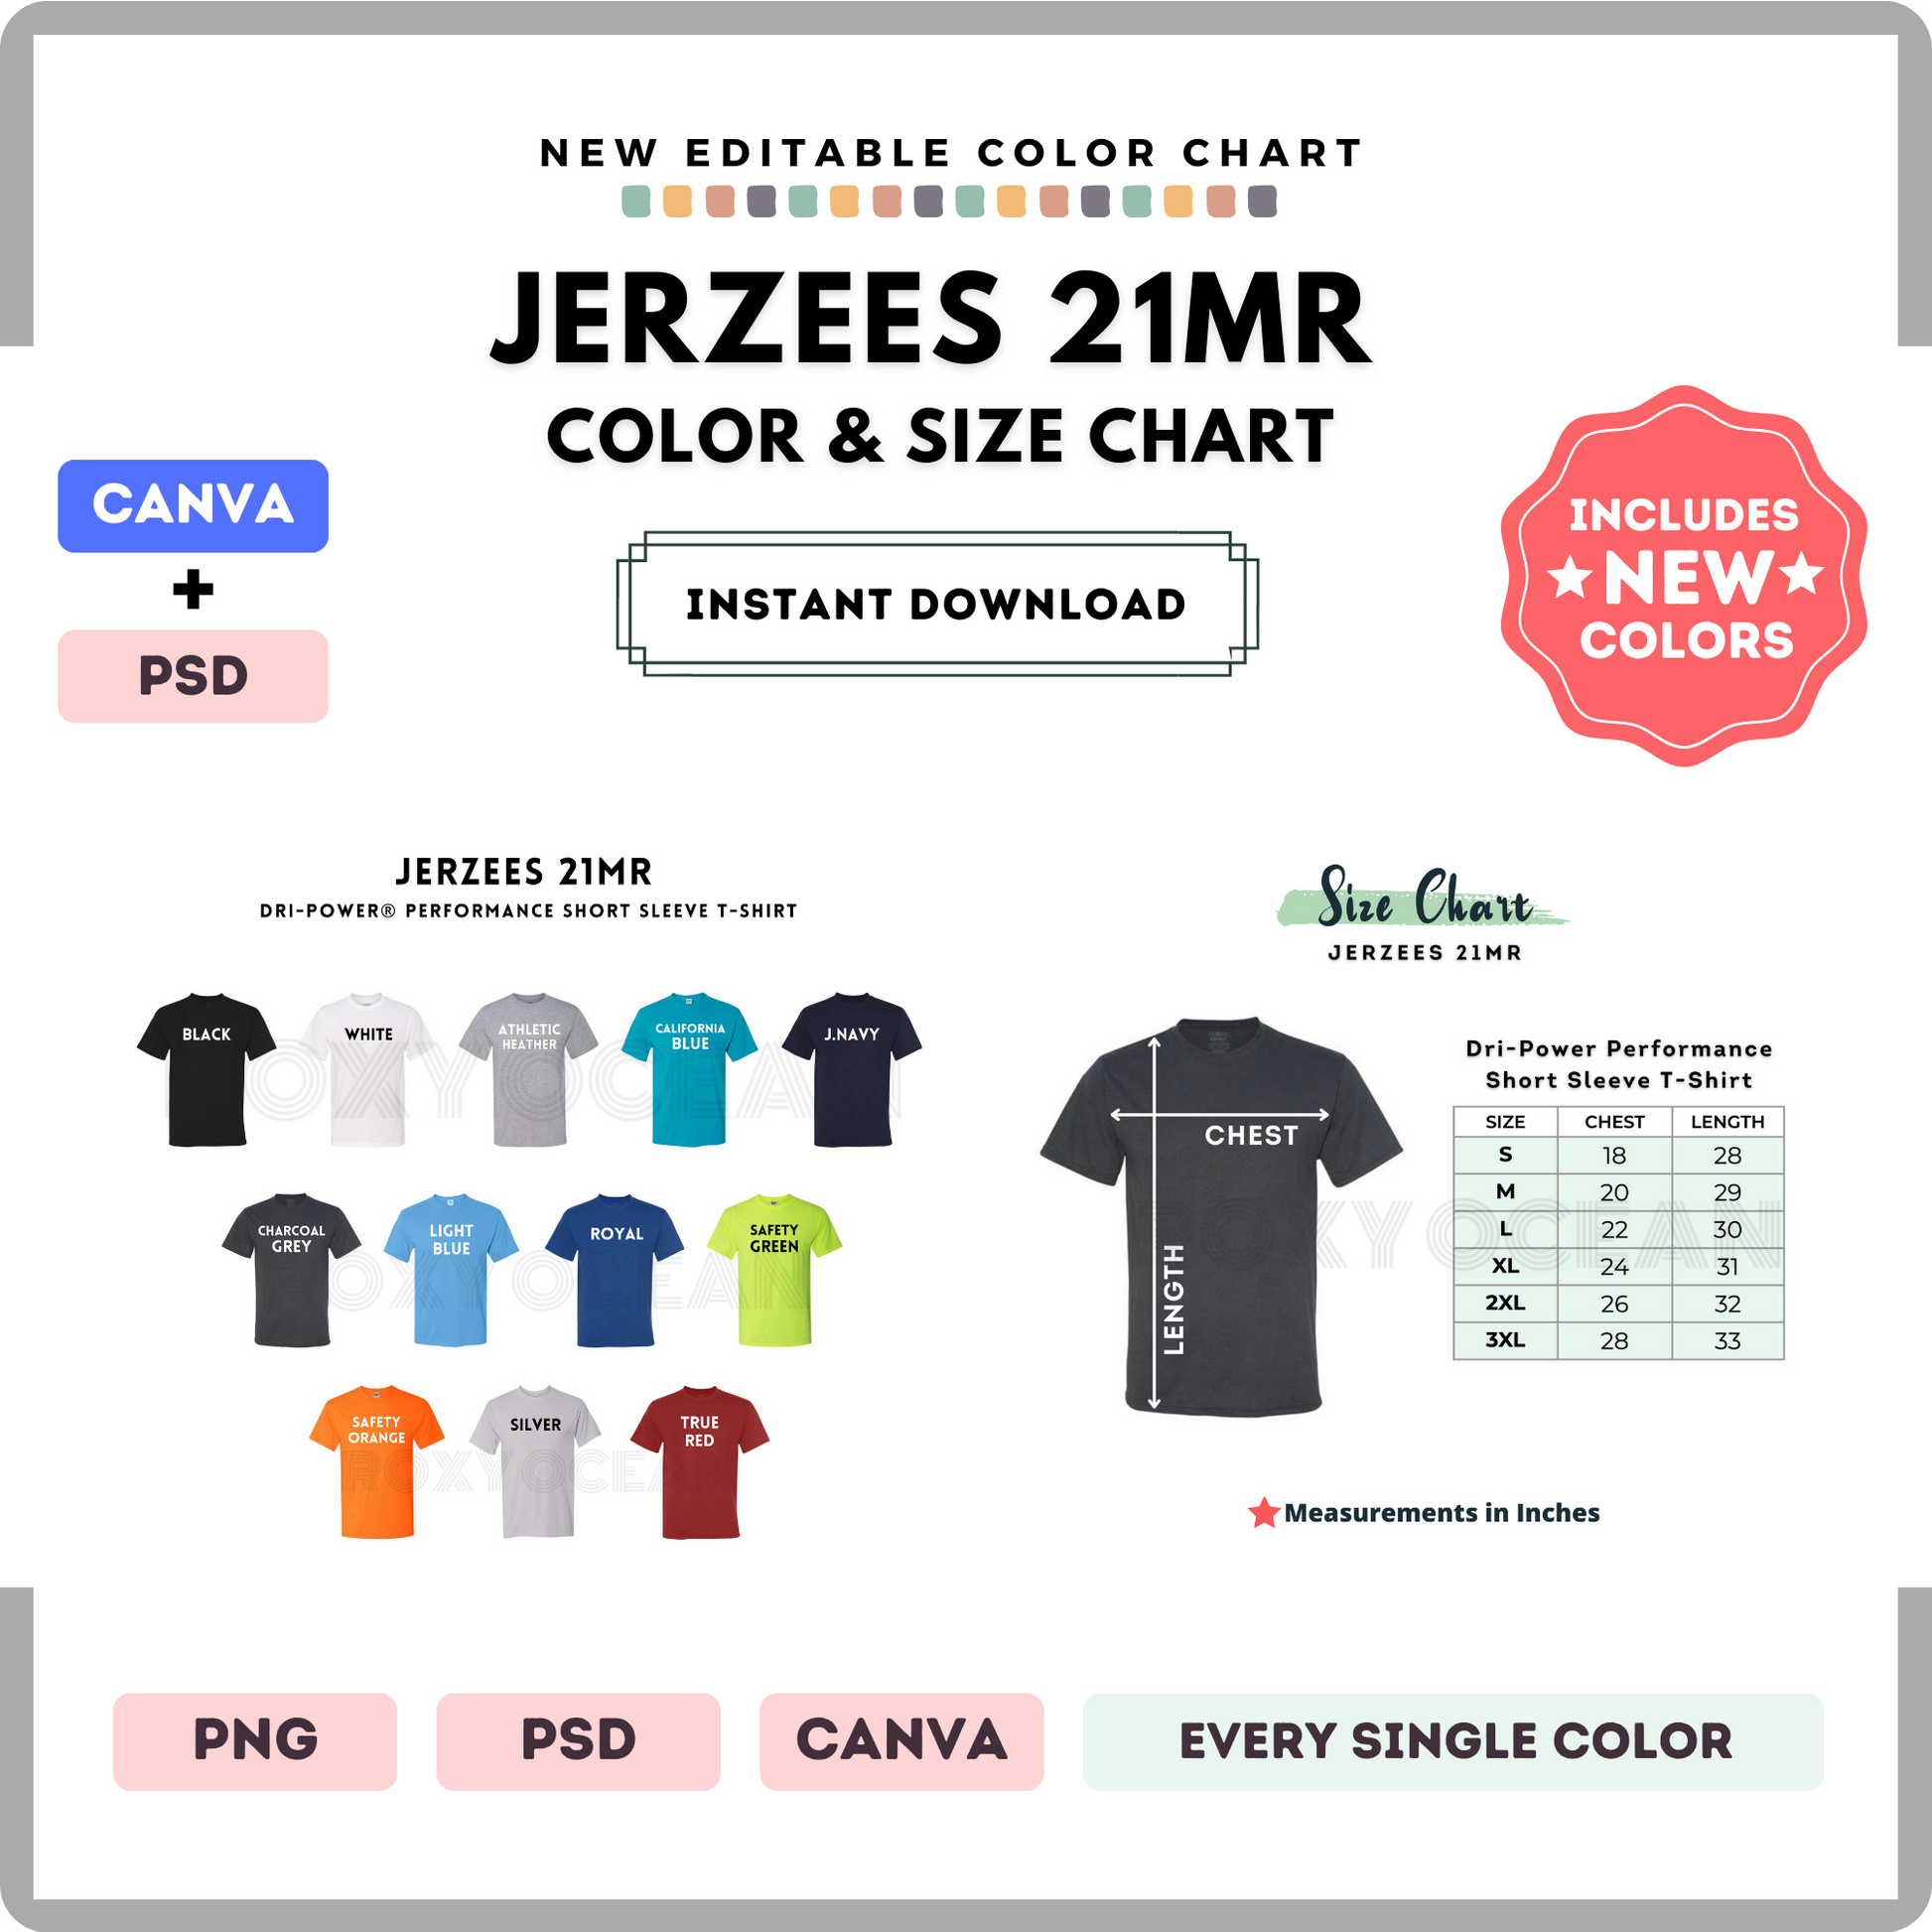 Jerzees 21MR Color and Size Chart